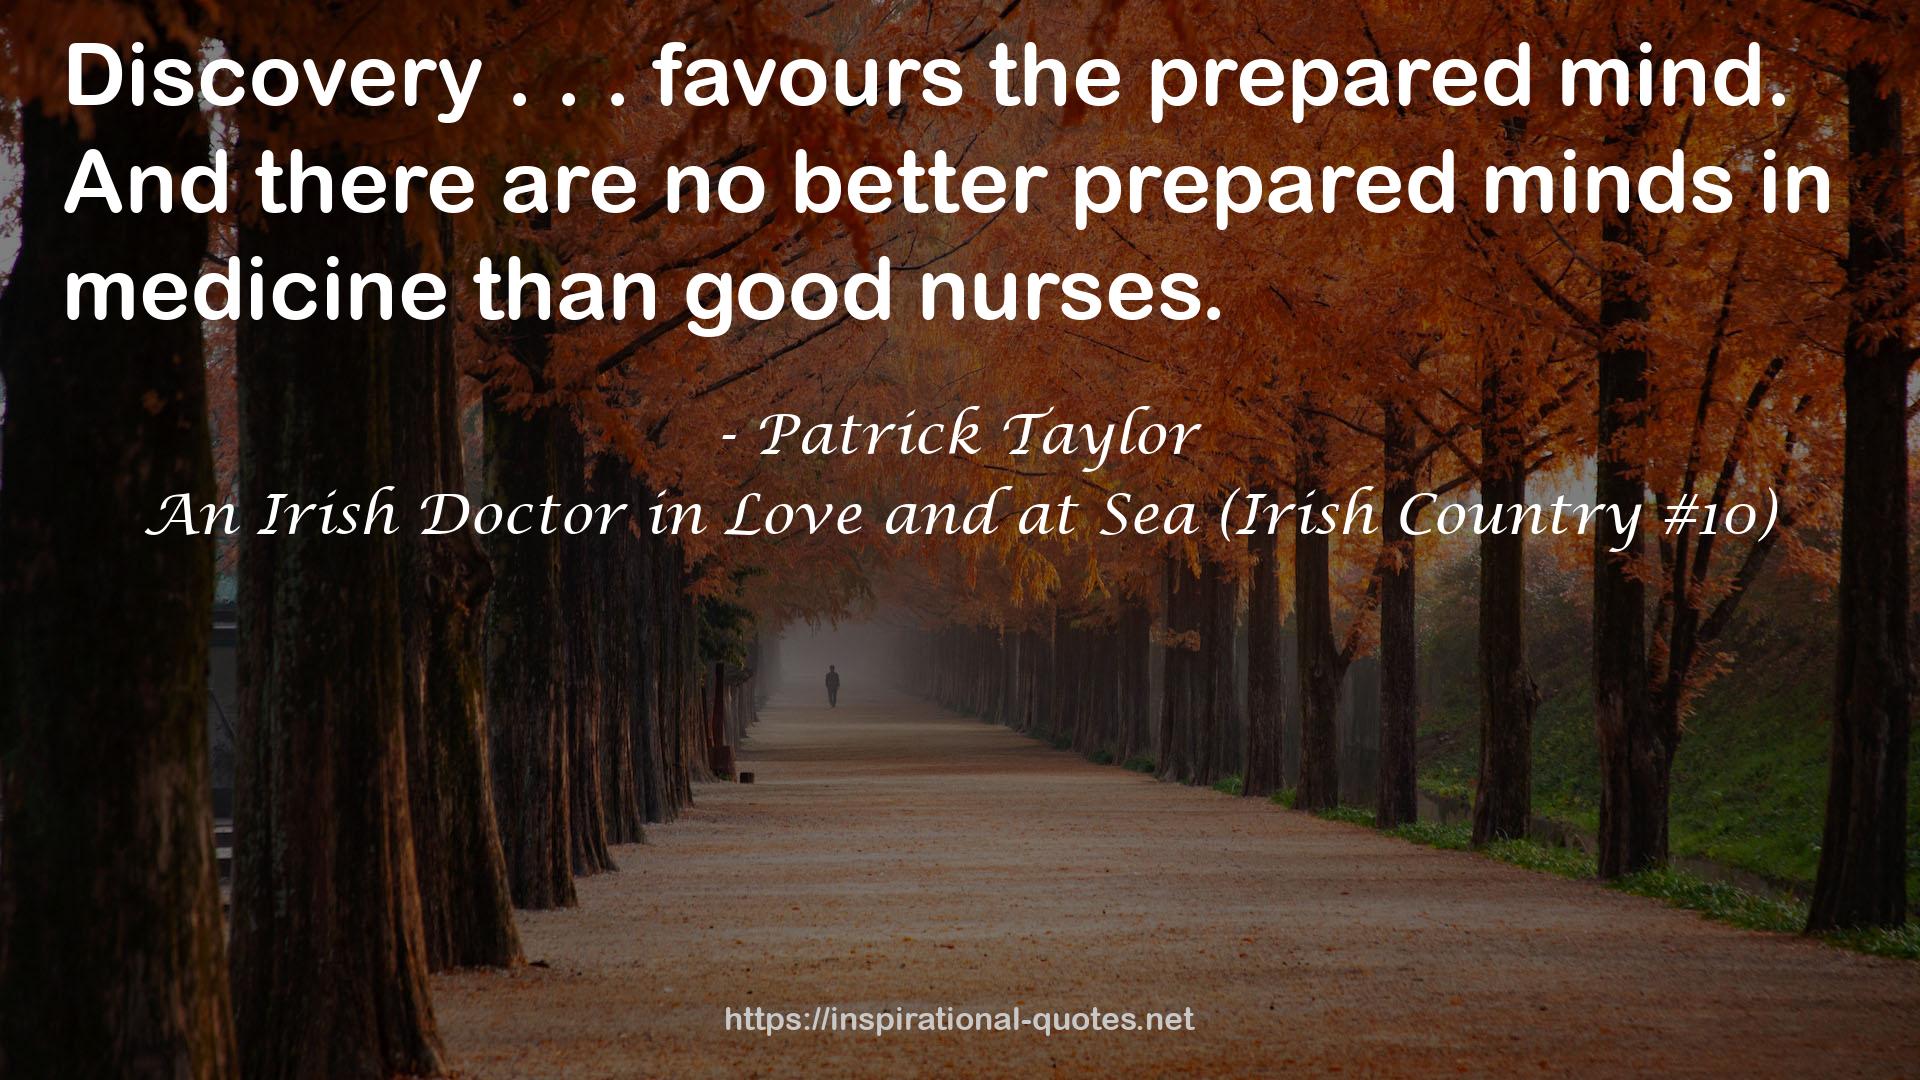 An Irish Doctor in Love and at Sea (Irish Country #10) QUOTES